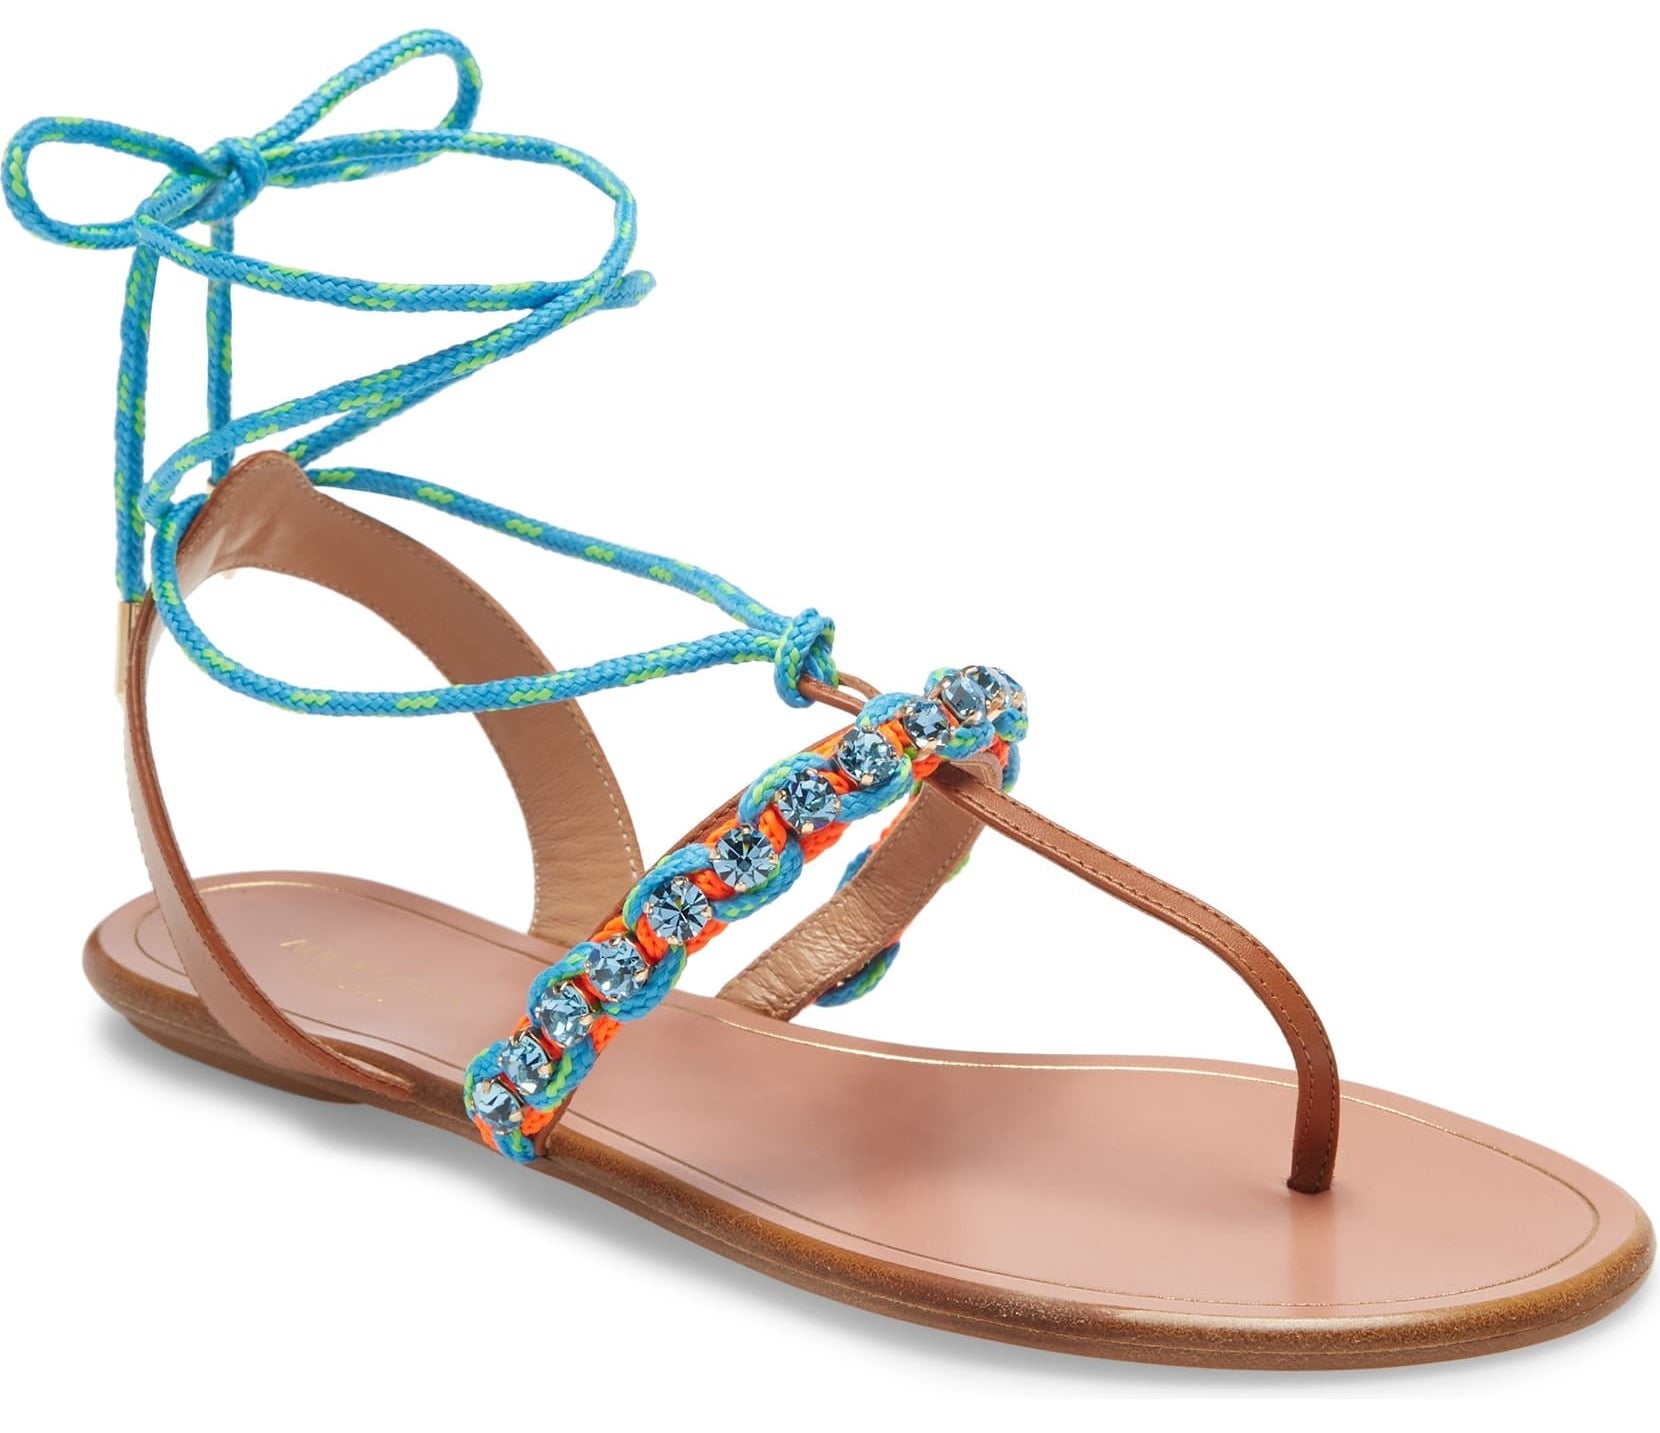 90 Of The Best Sandals You Can Get Online